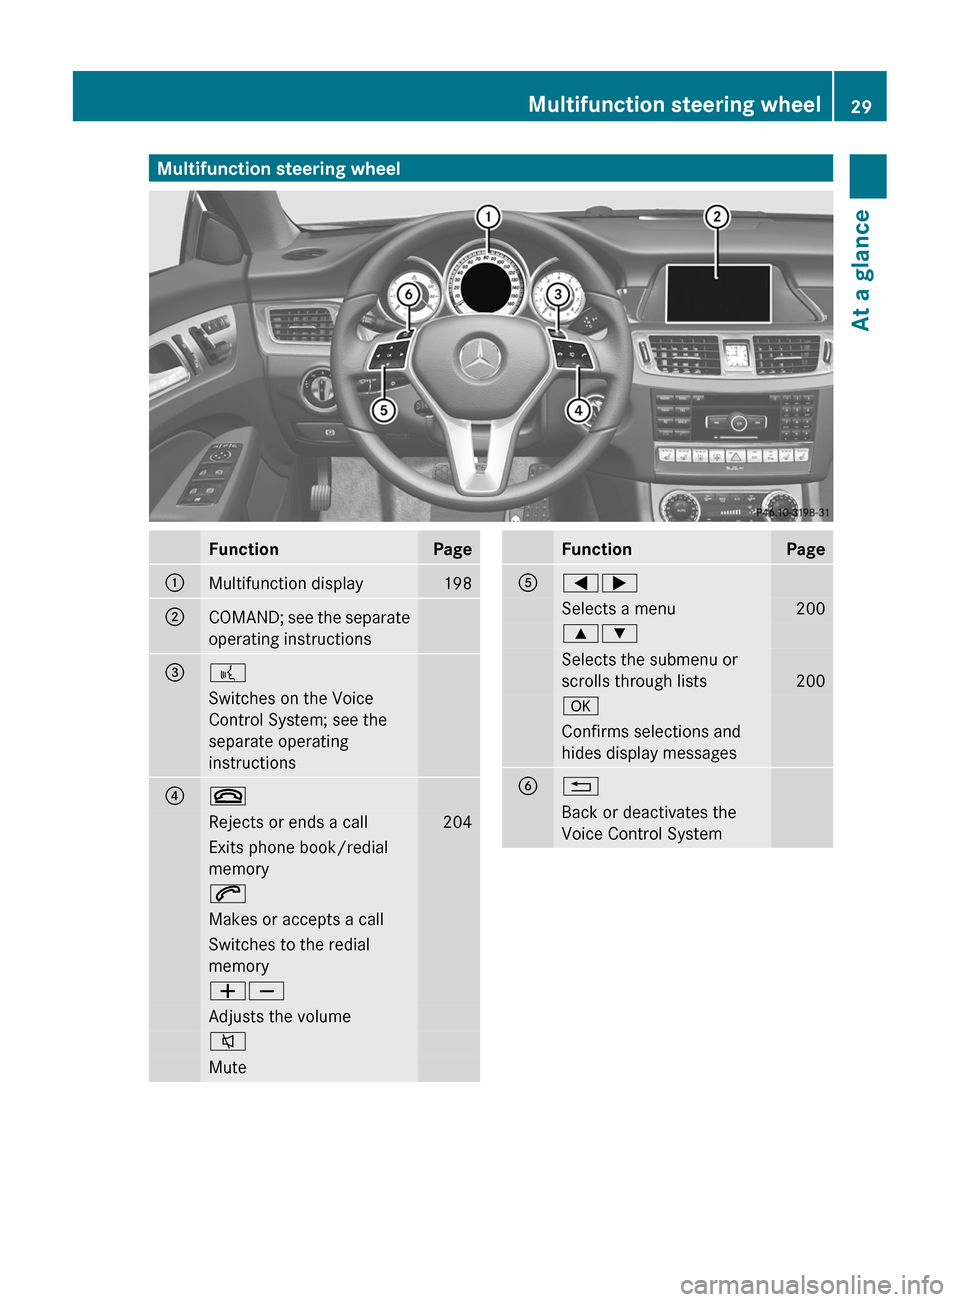 MERCEDES-BENZ CLS-Class 2012 W218 Owners Guide Multifunction steering wheelFunctionPage:Multifunction display198;COMAND; see the separate
operating instructions=?Switches on the Voice
Control System; see the
separate operating
instructions?~Reject